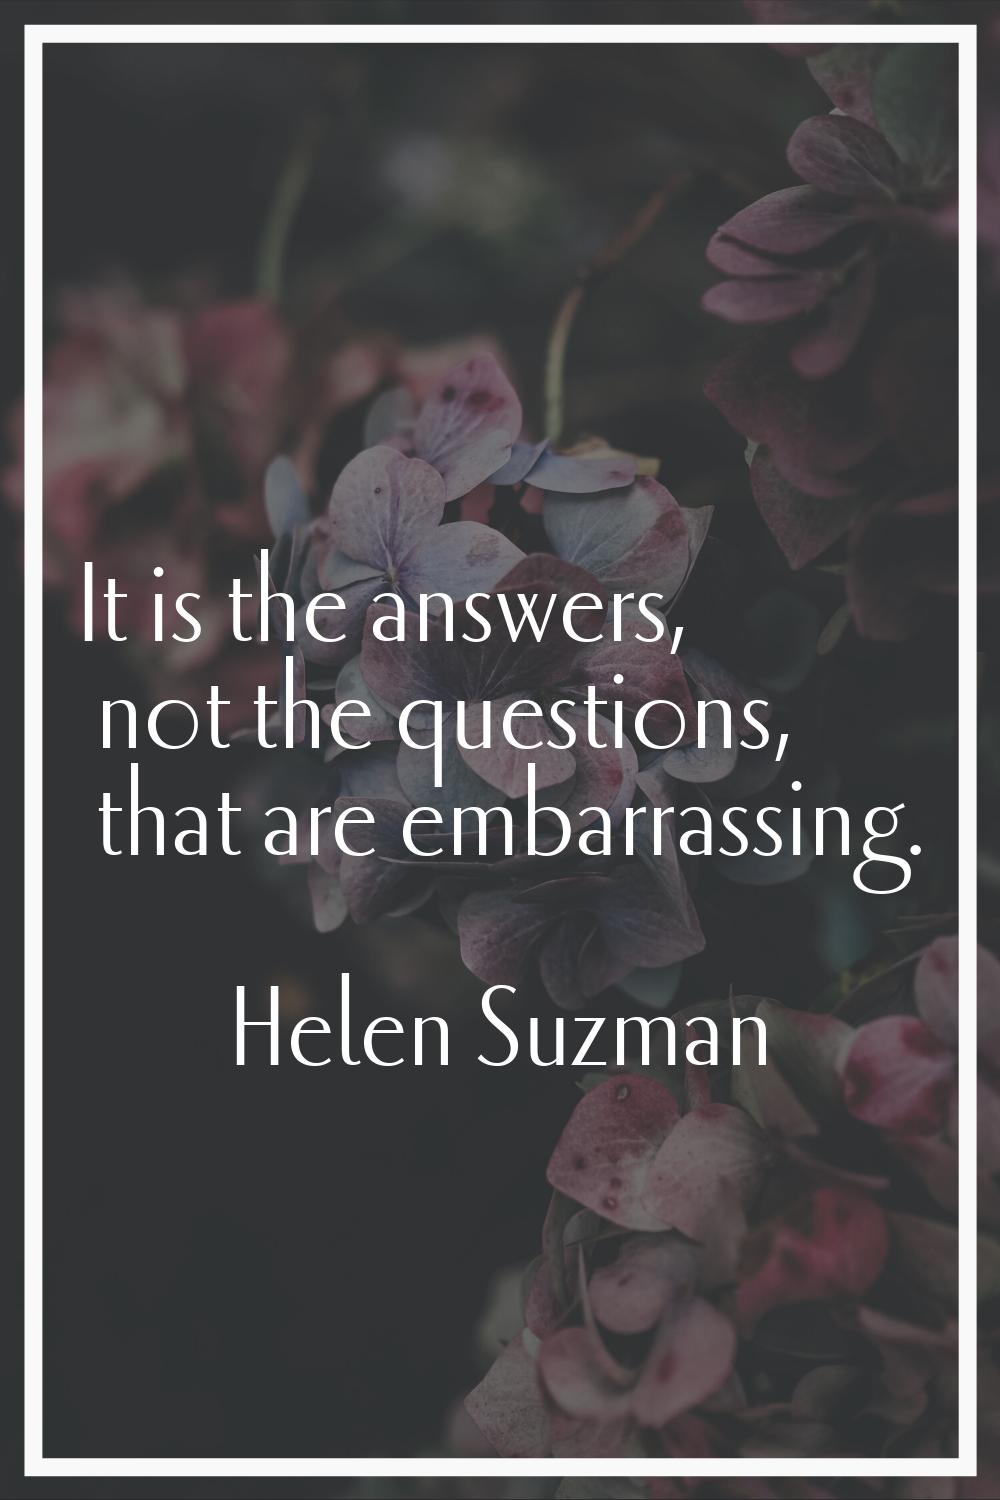 It is the answers, not the questions, that are embarrassing.